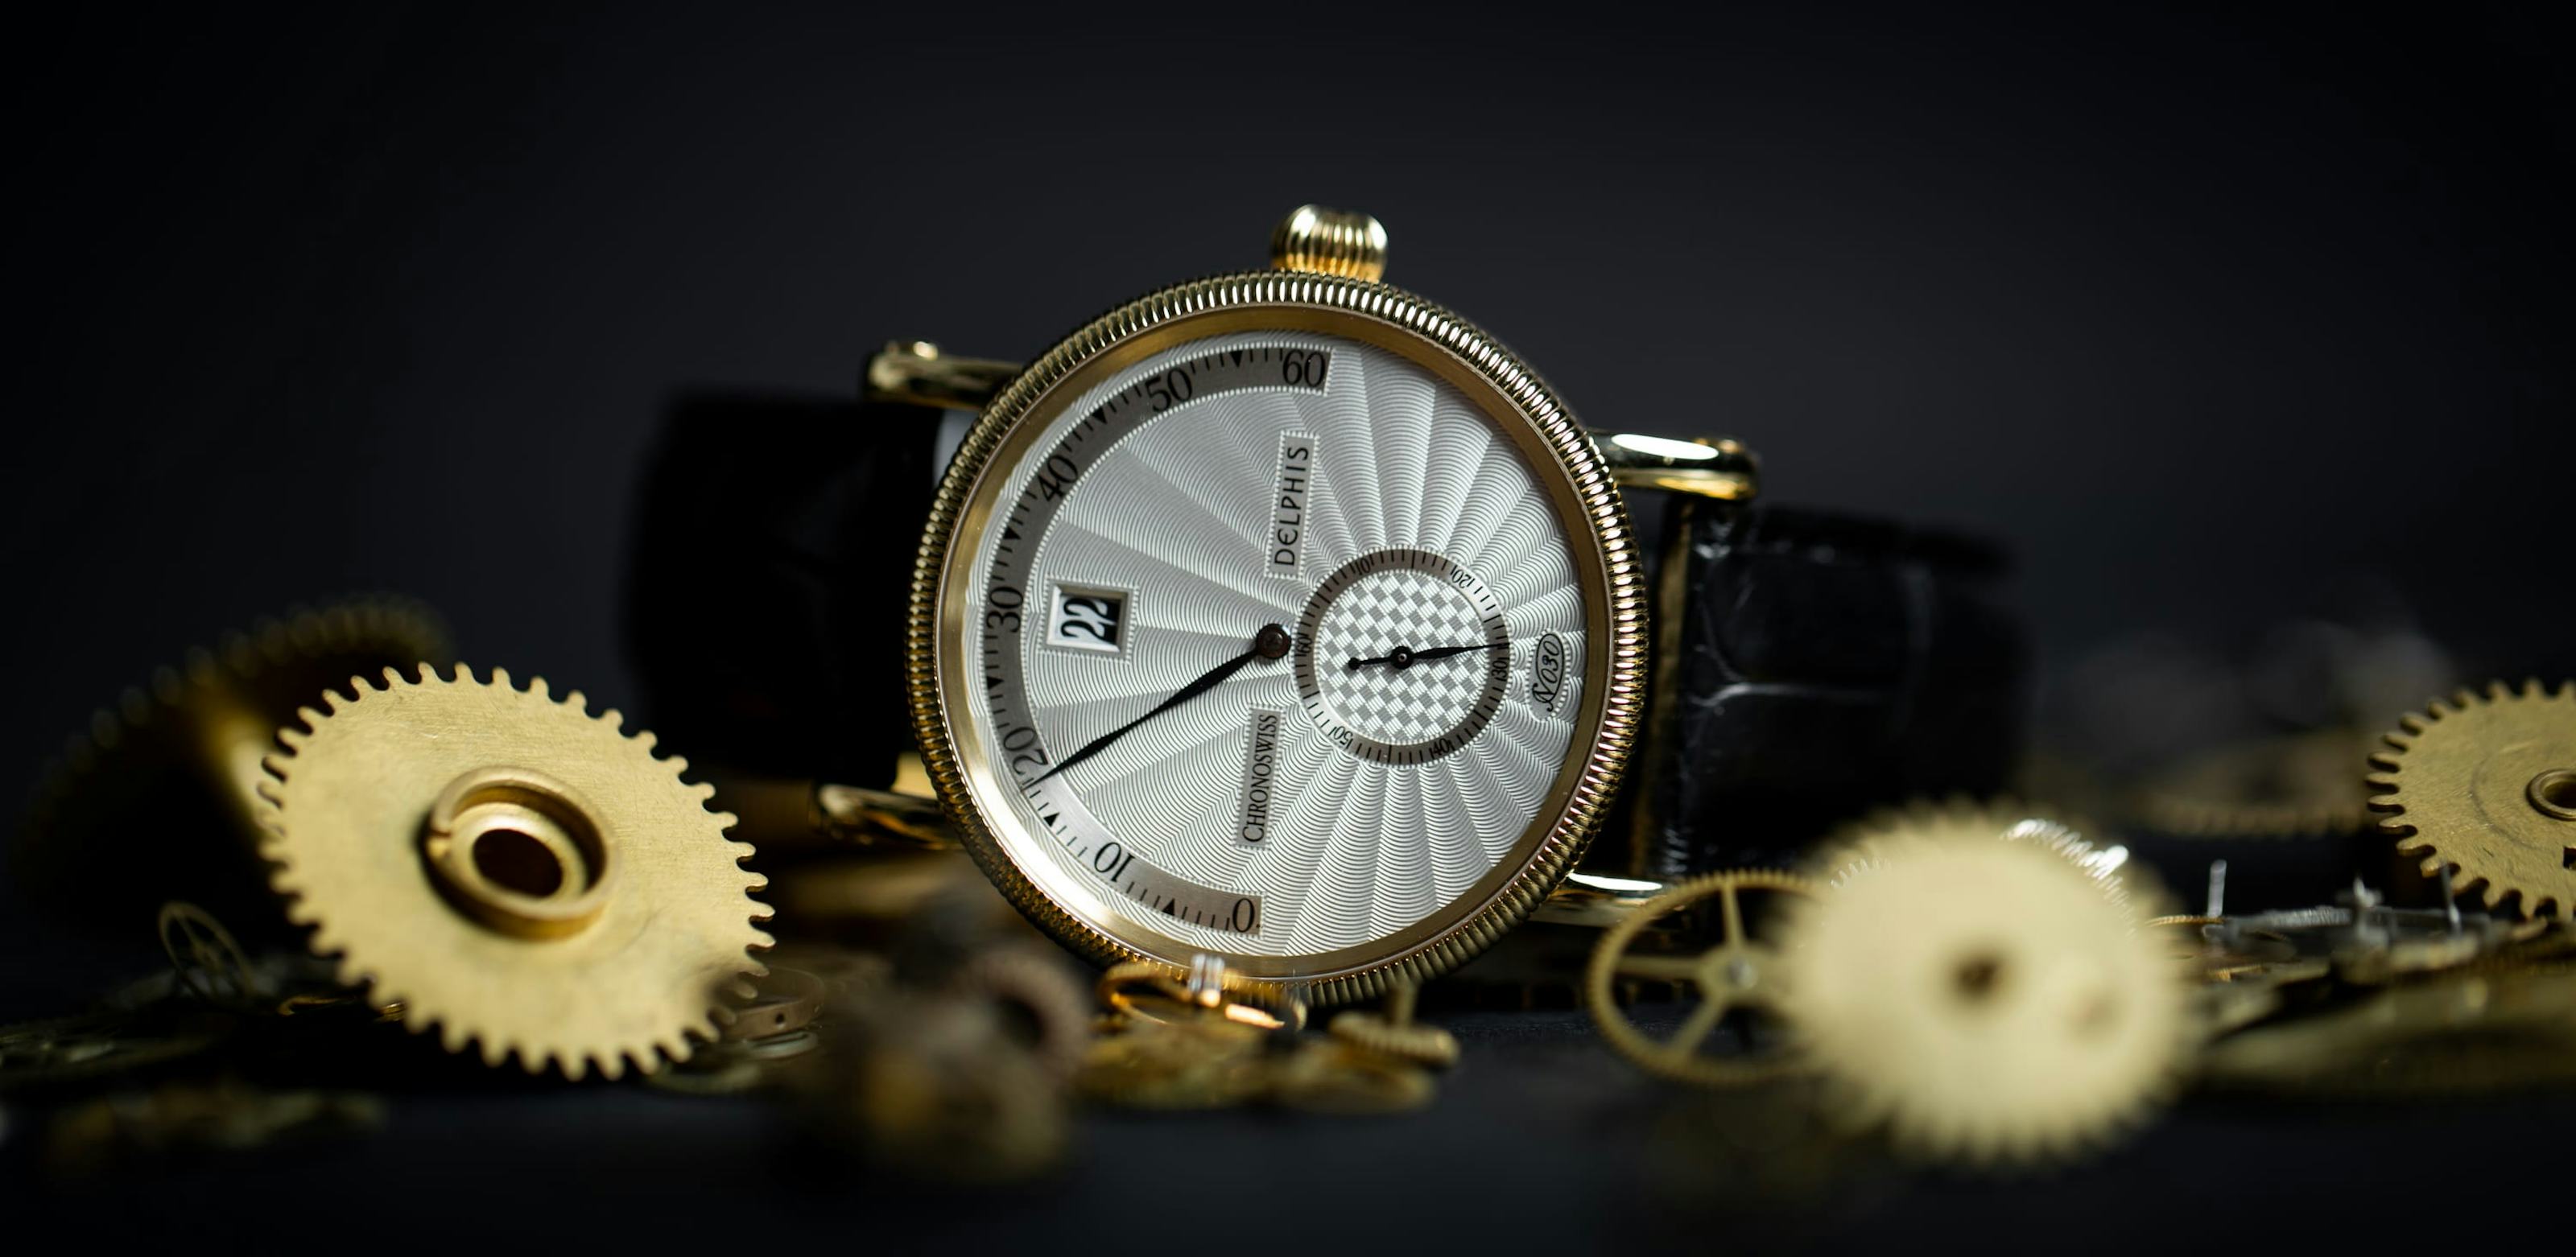 Gift Guide: Complicated Watches